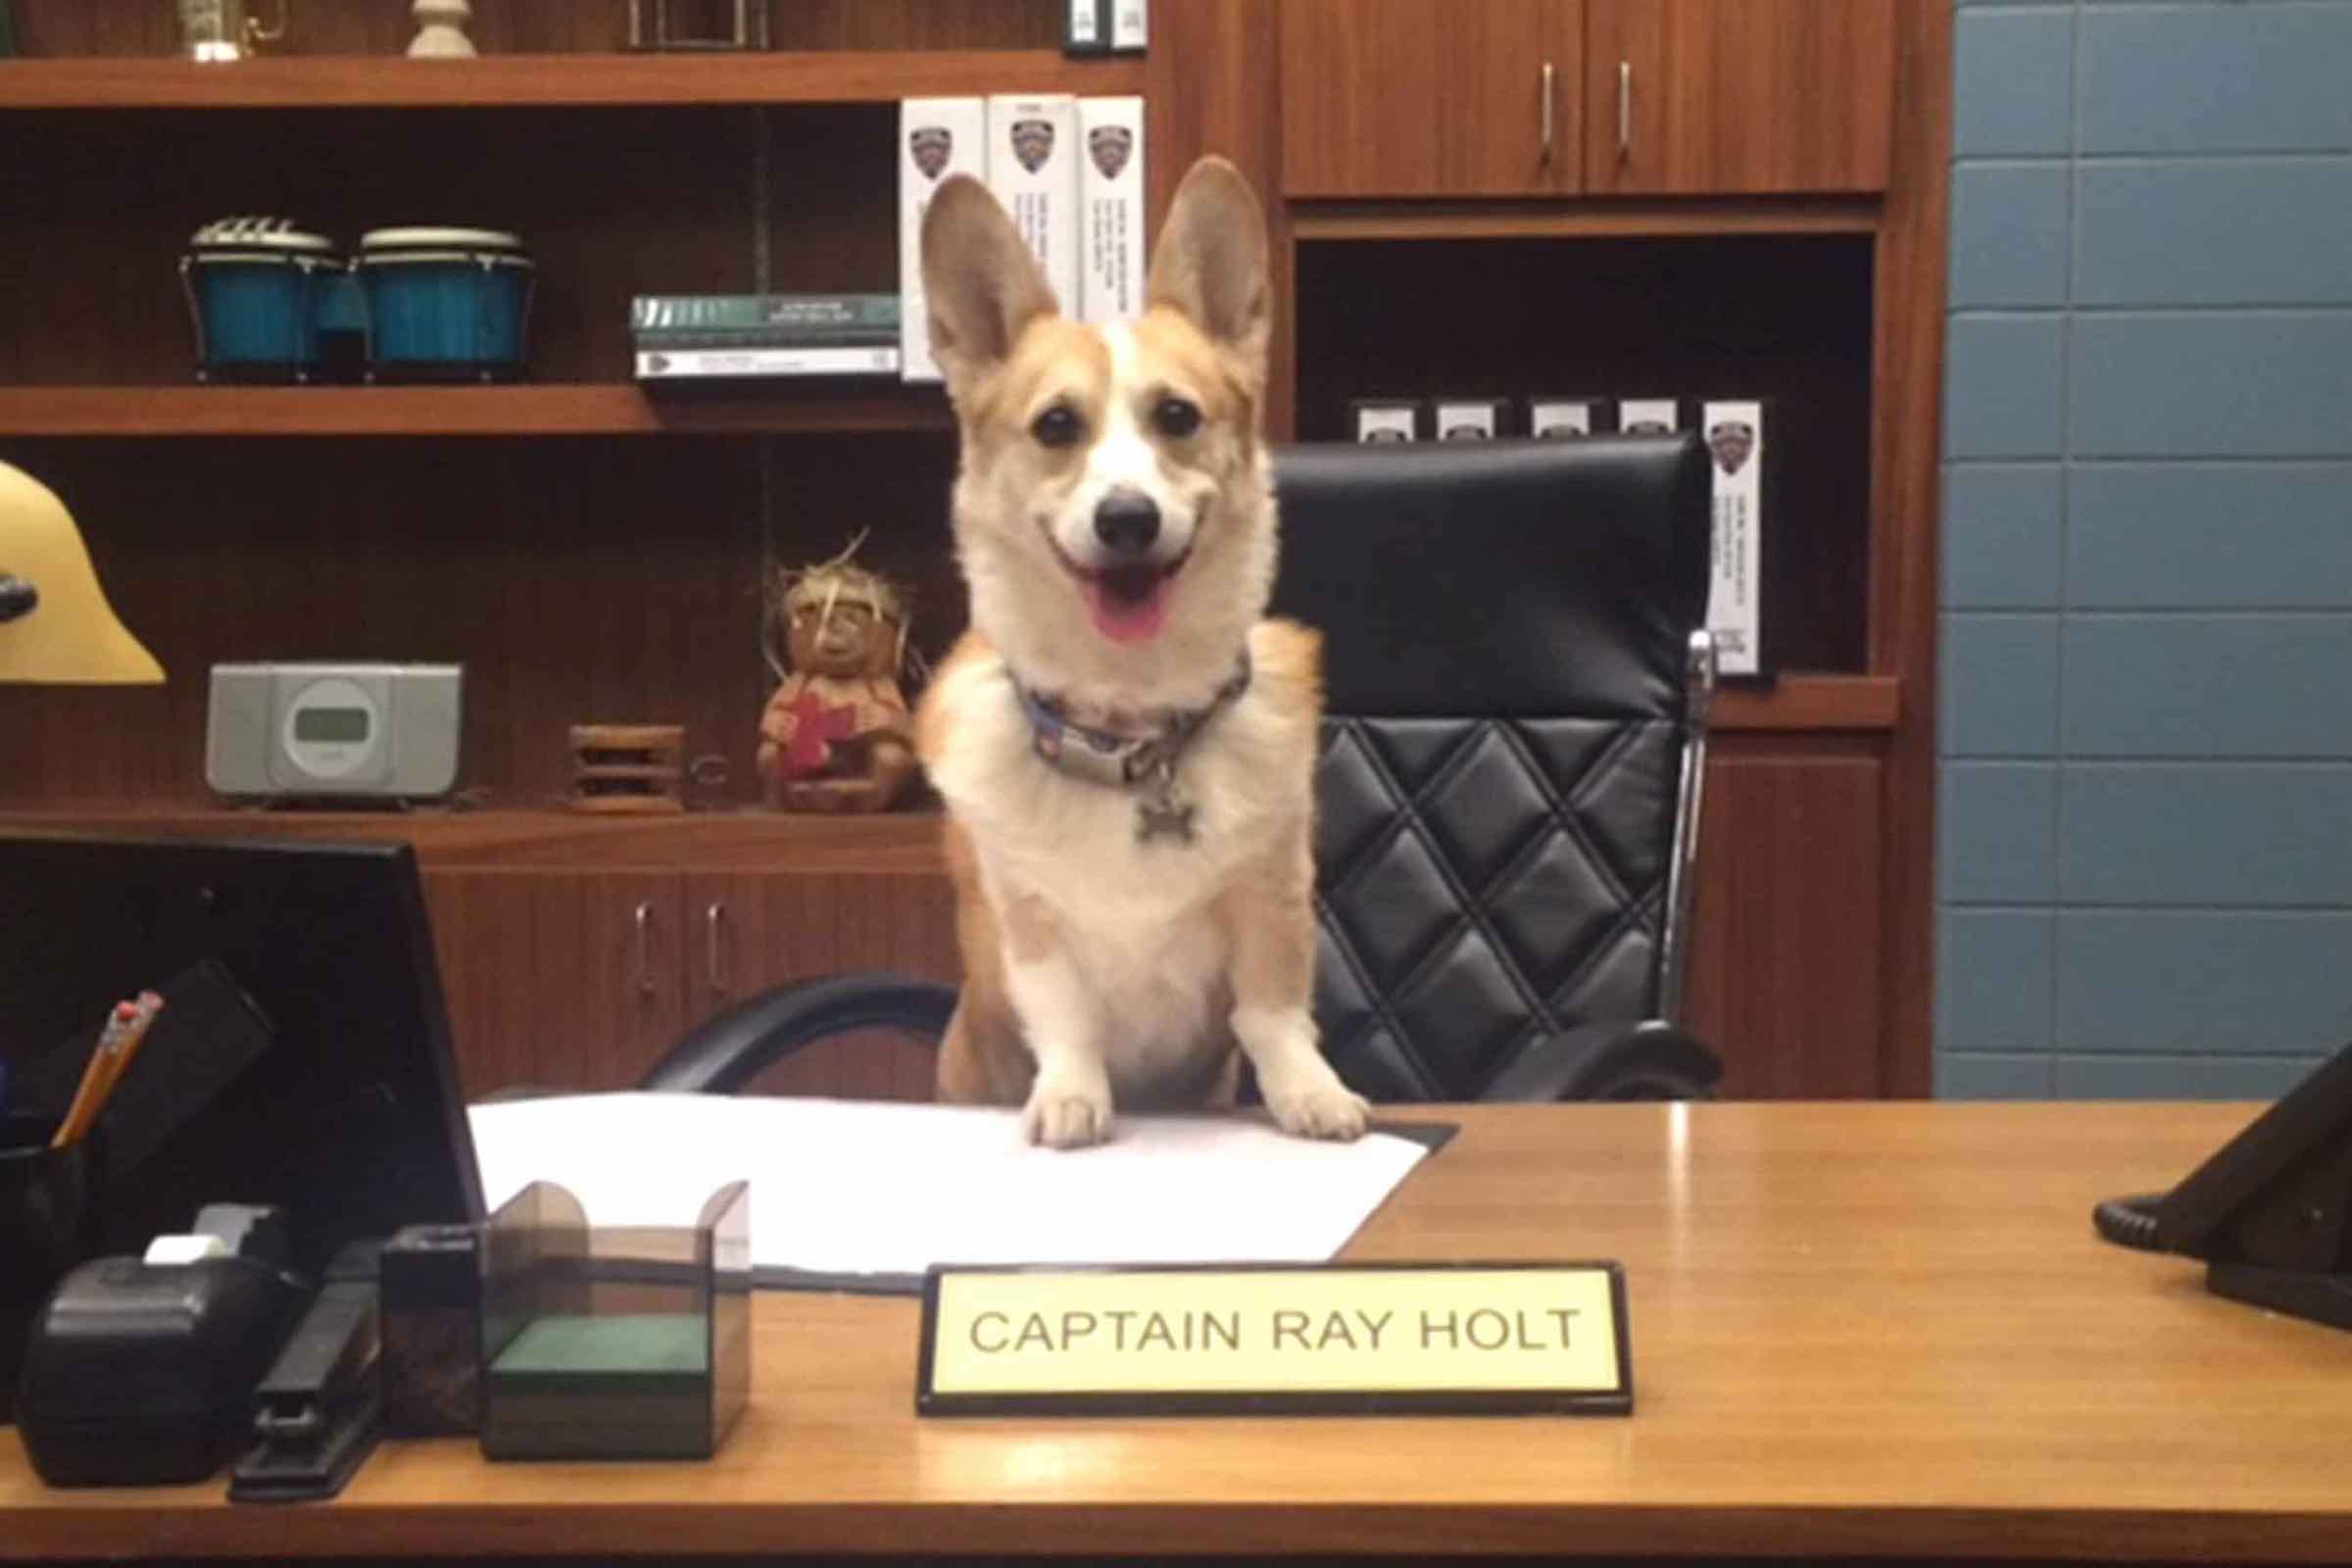 Cheddar Holt has passed. We revisit the legacy of the good dog from ‘Brooklyn Nine-Nine’.